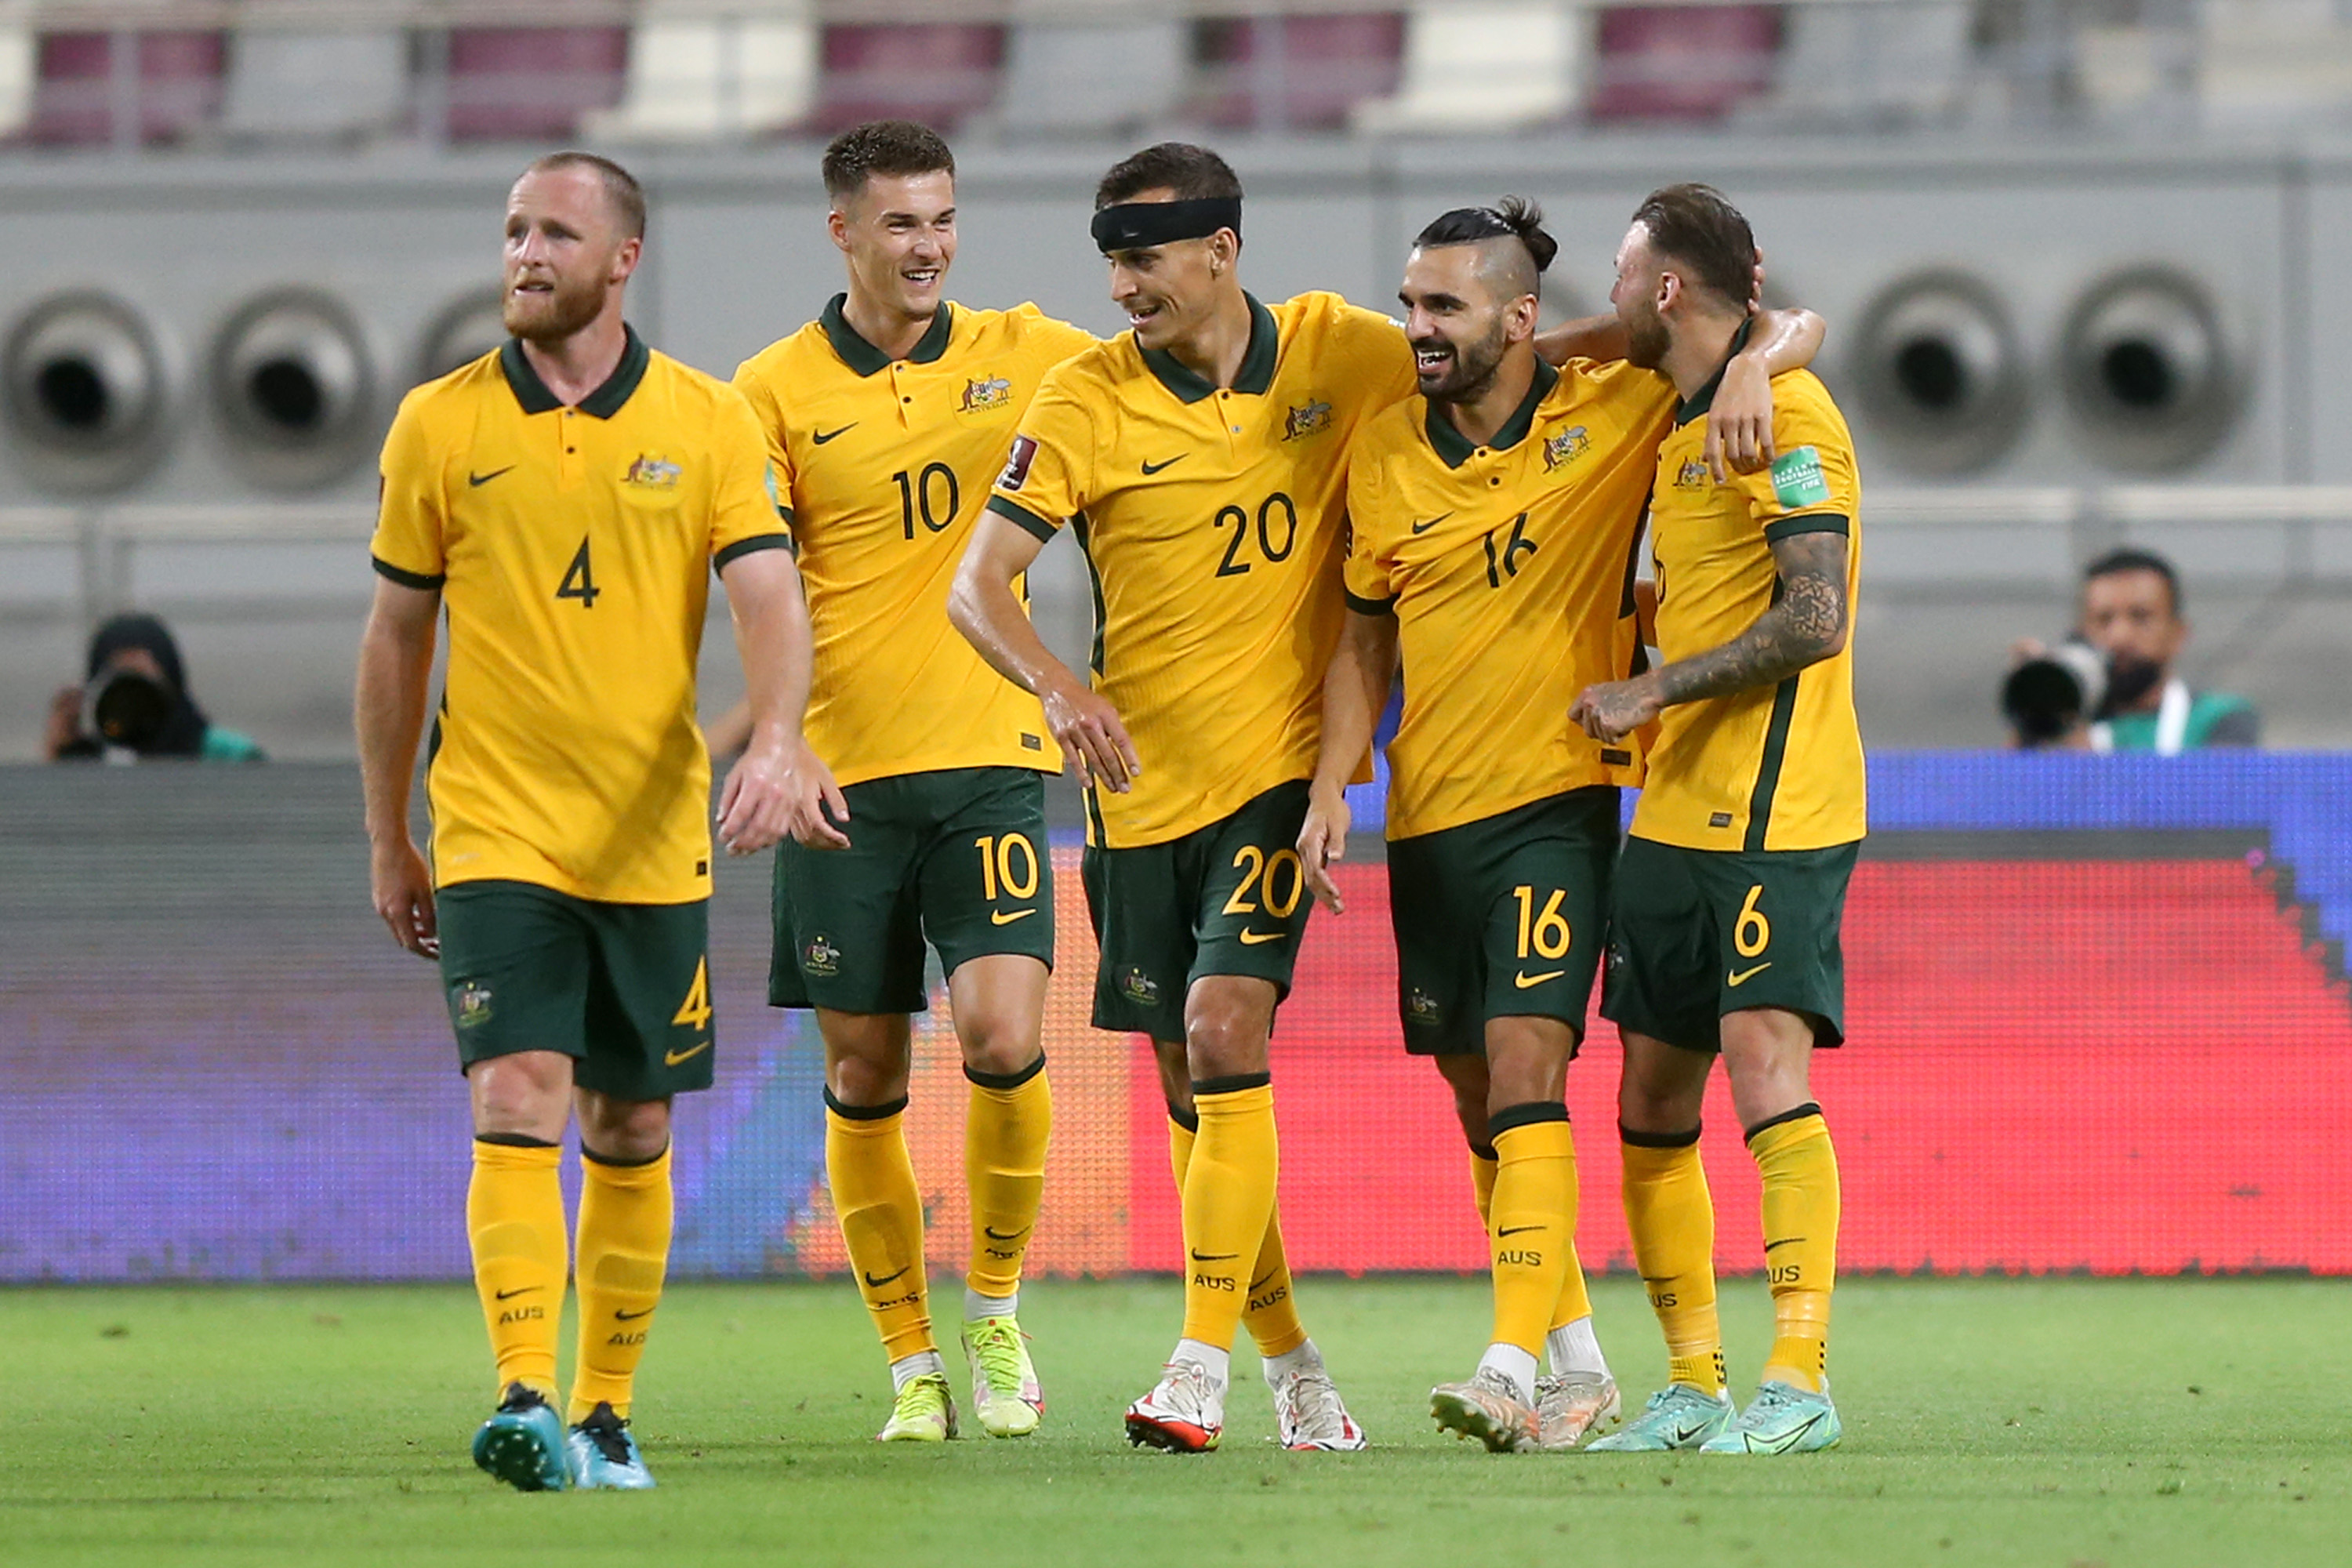 Subway Socceroos record highest FIFA World Ranking in 10 years